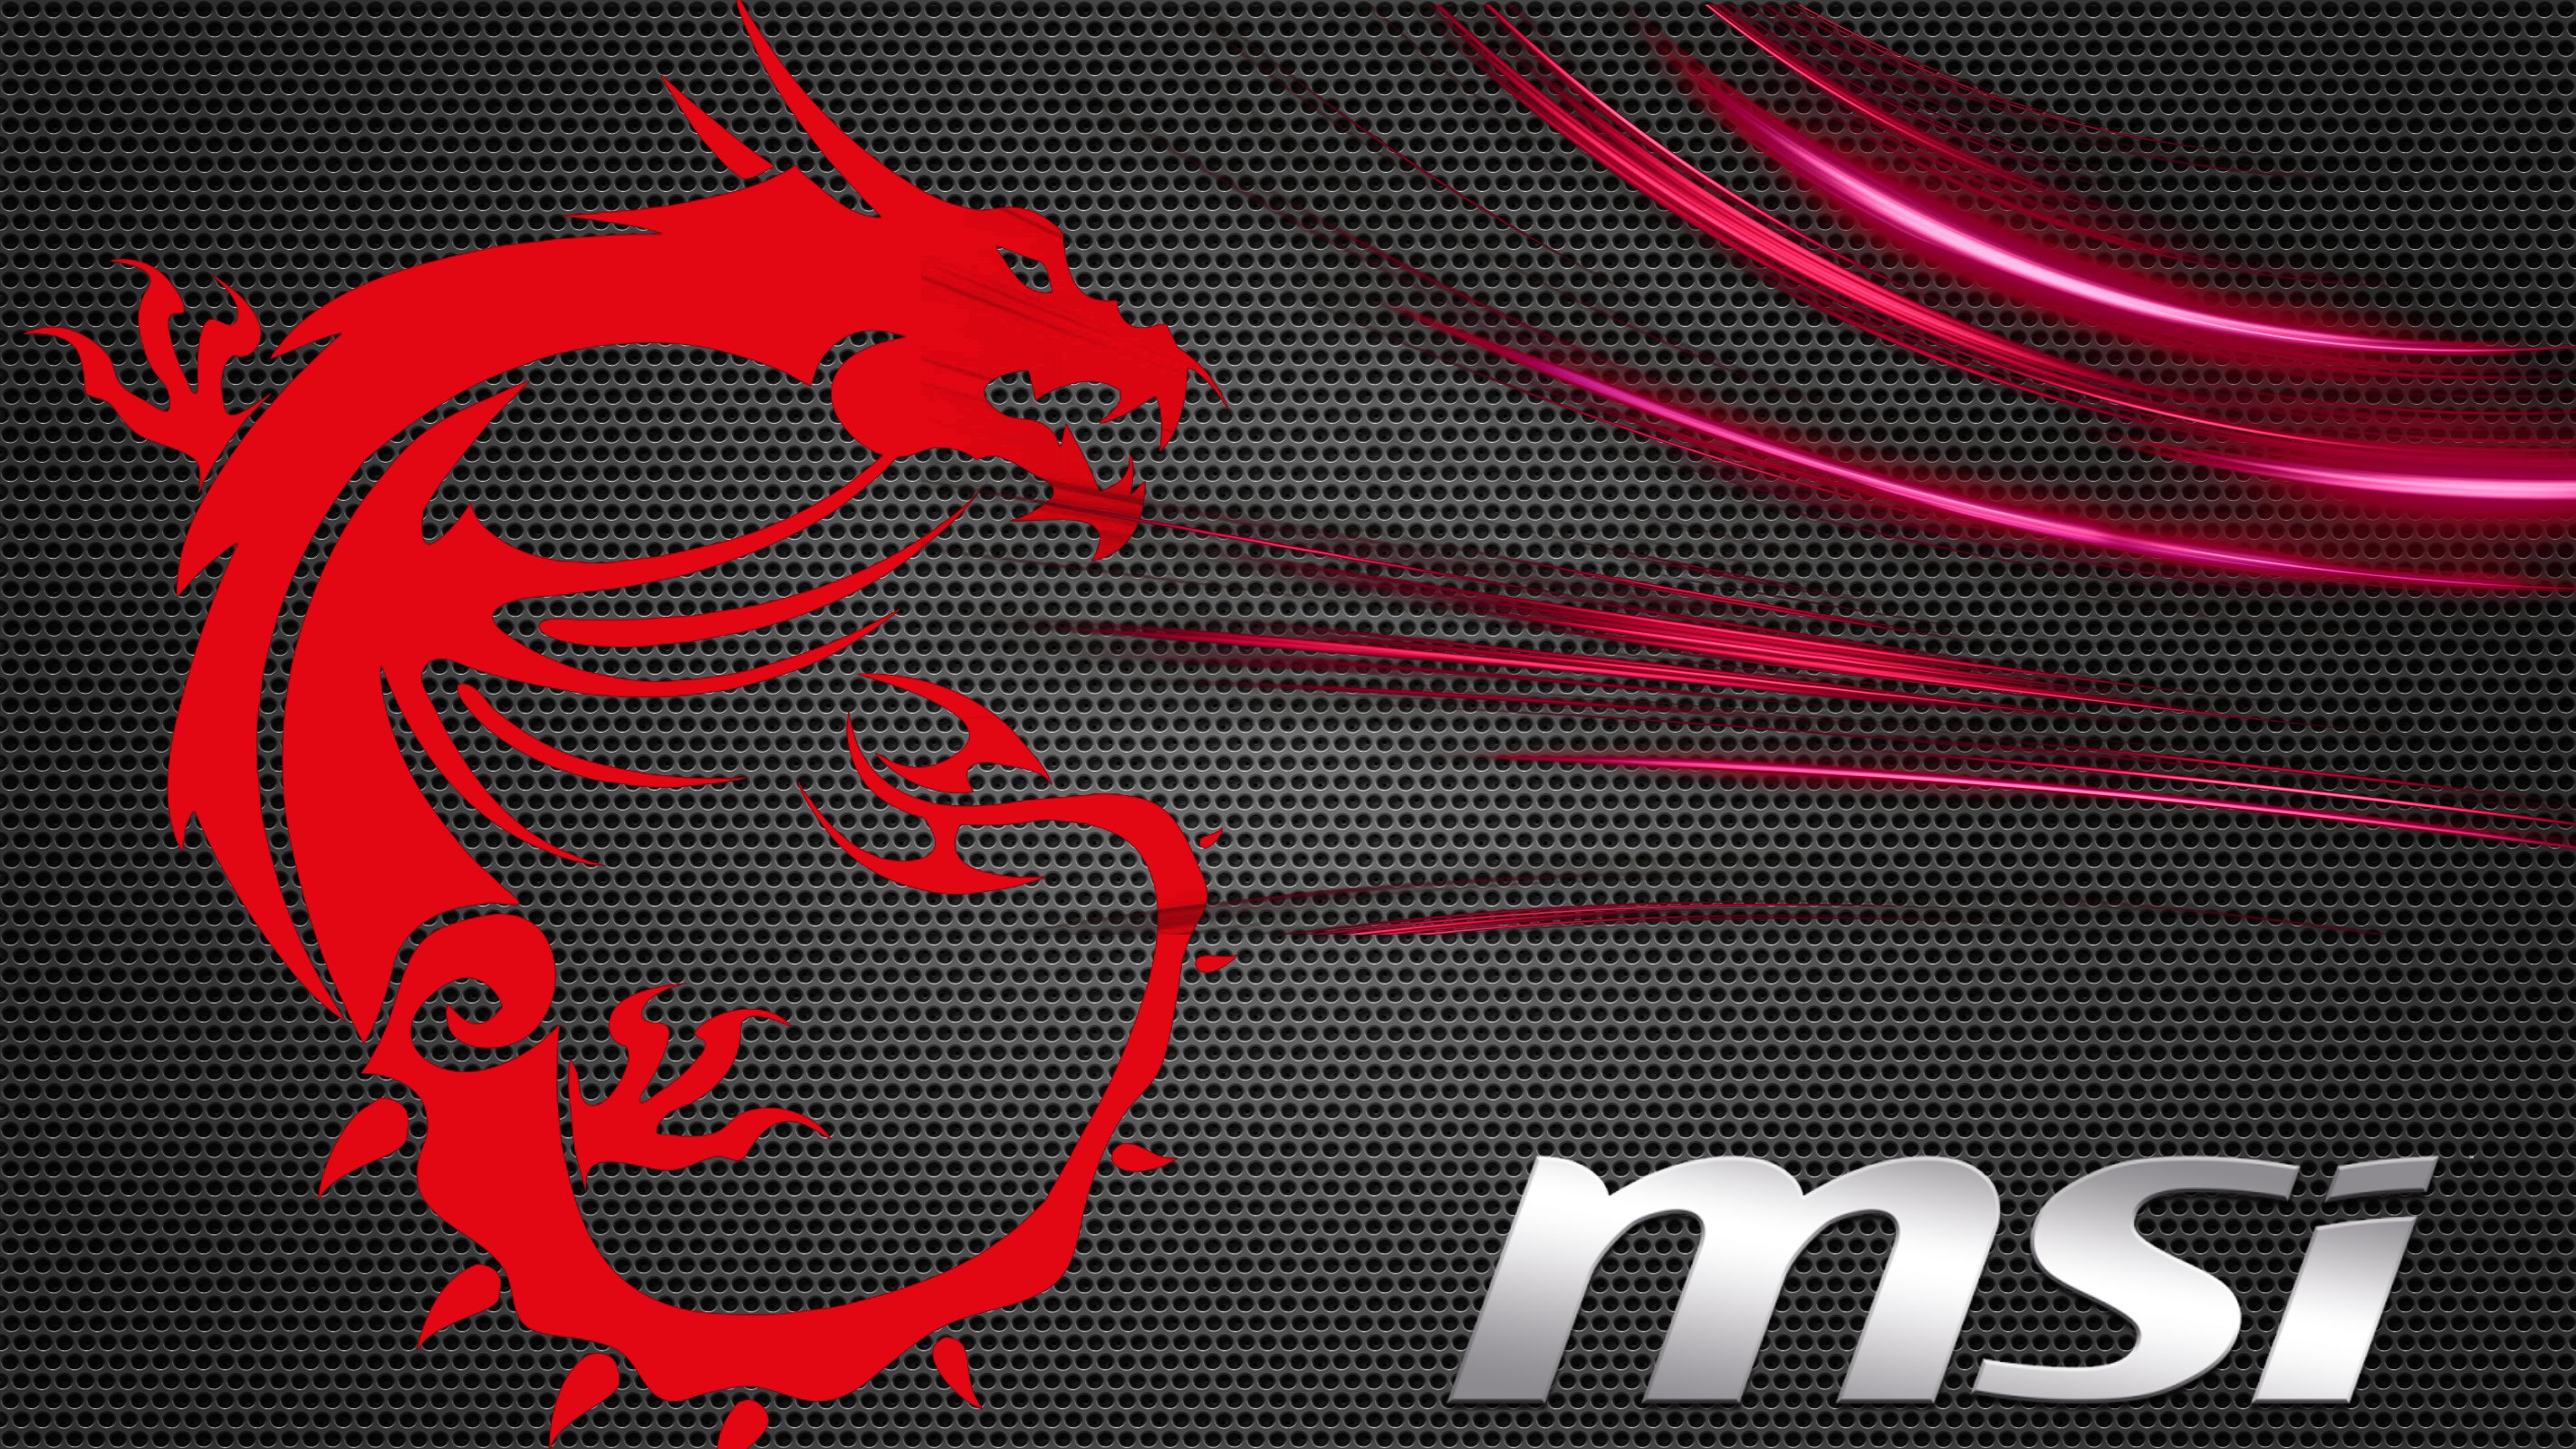 MSI Dragon Wallpaper by iKenny Walls on